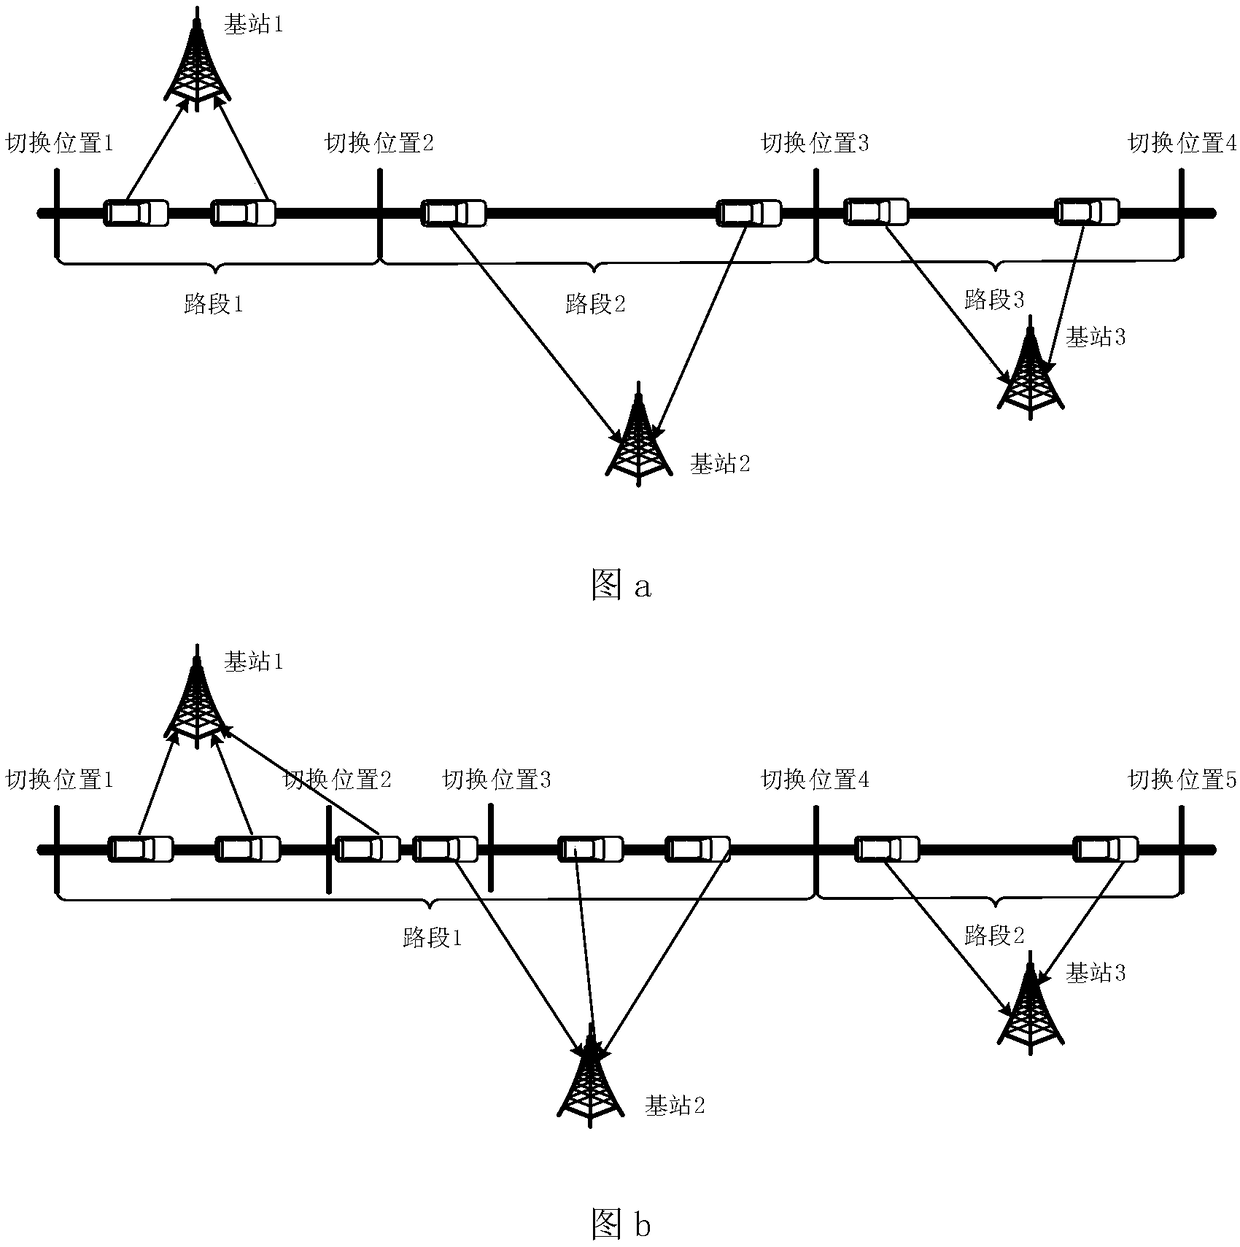 A real-time detection method for expressway abnormal events based on mobile phone data